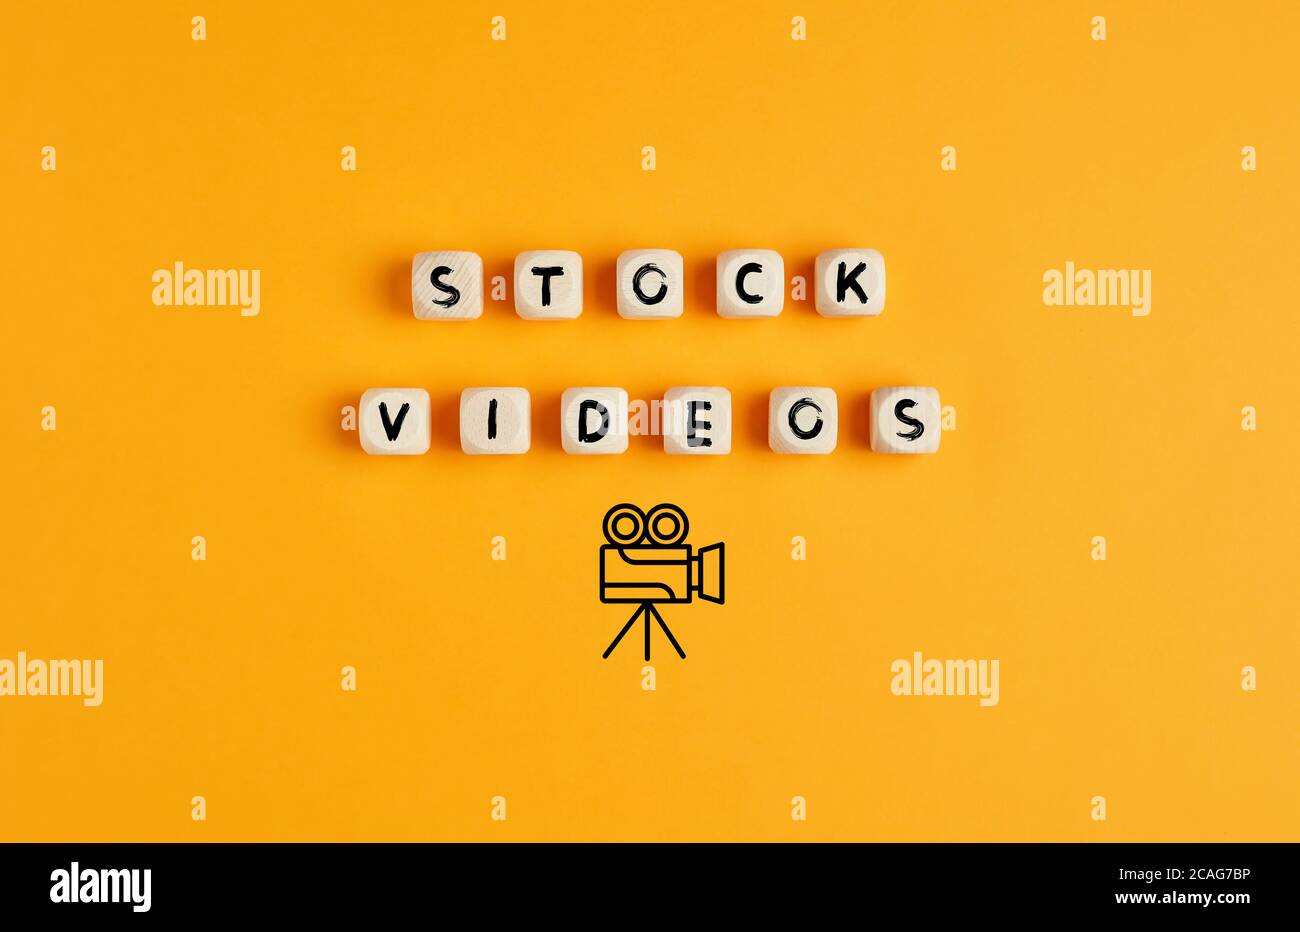 The words stock videos on wooden cubes with camera icon against yellow background. Stock phorography or phoro library concept. Stock Photo